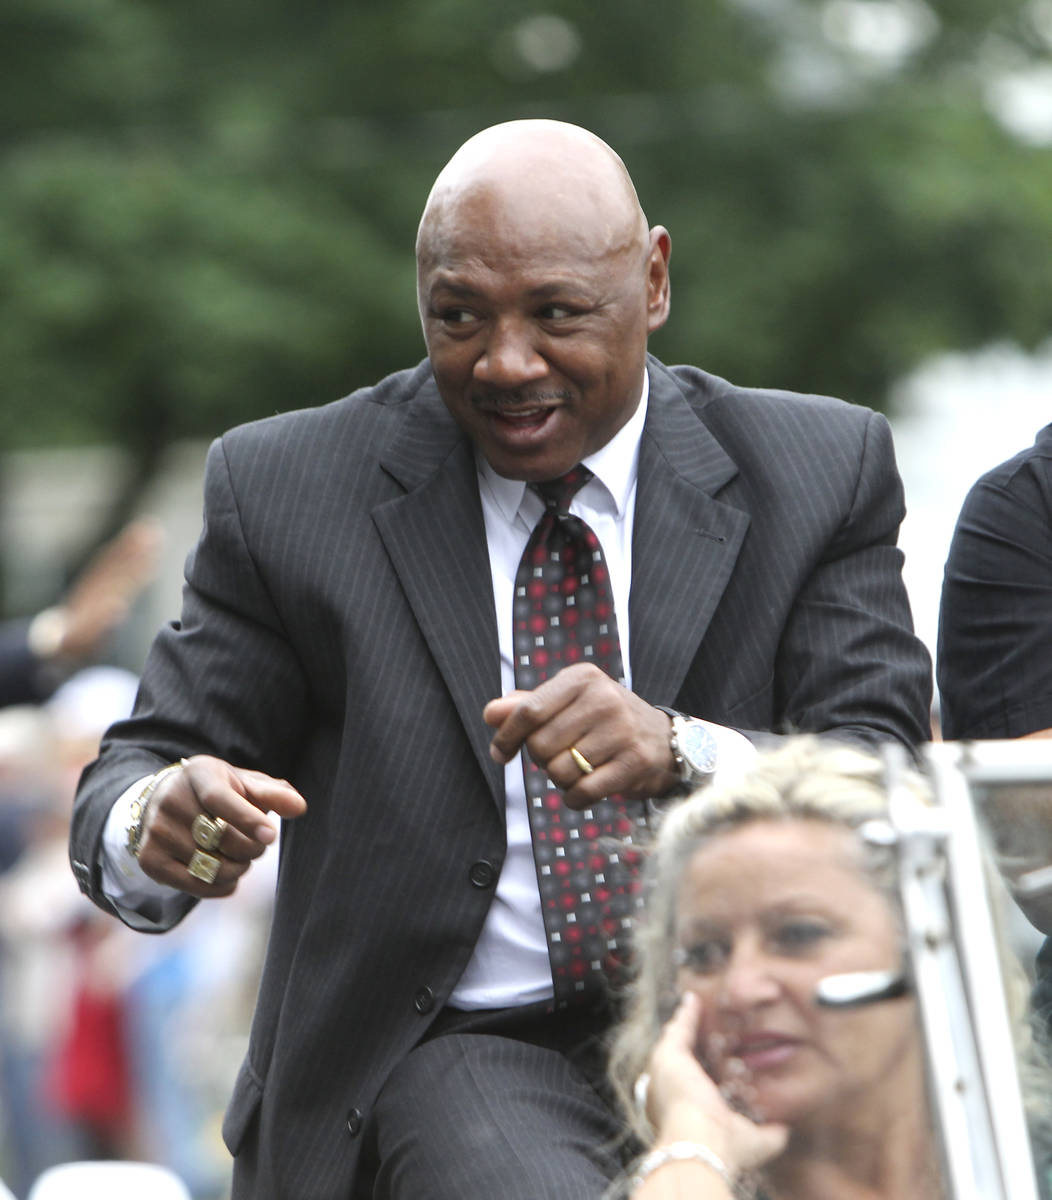 Hall of Famer Marvelous Marvin Hagler at the Boxing Hall of Fame parade in Canastota, N.Y., on ...